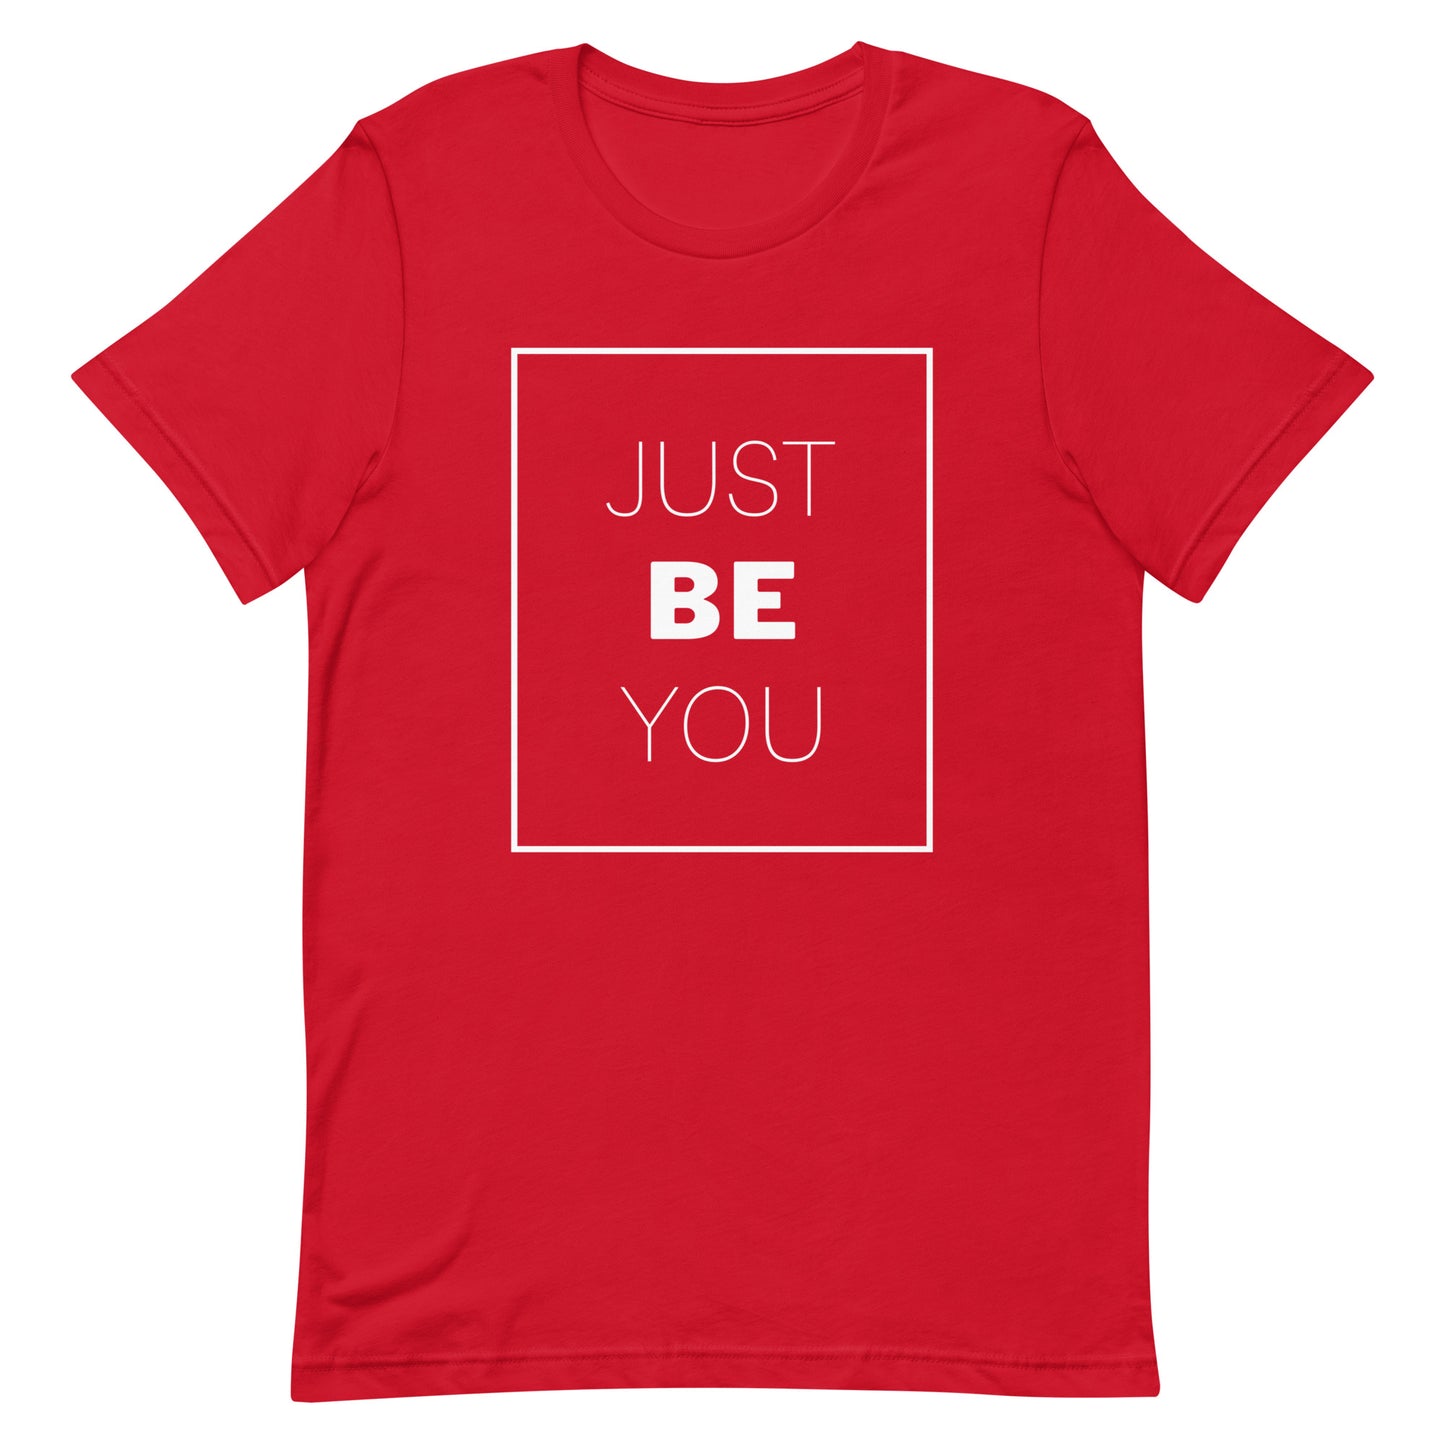 Unisex t-shirt "Just BE You"